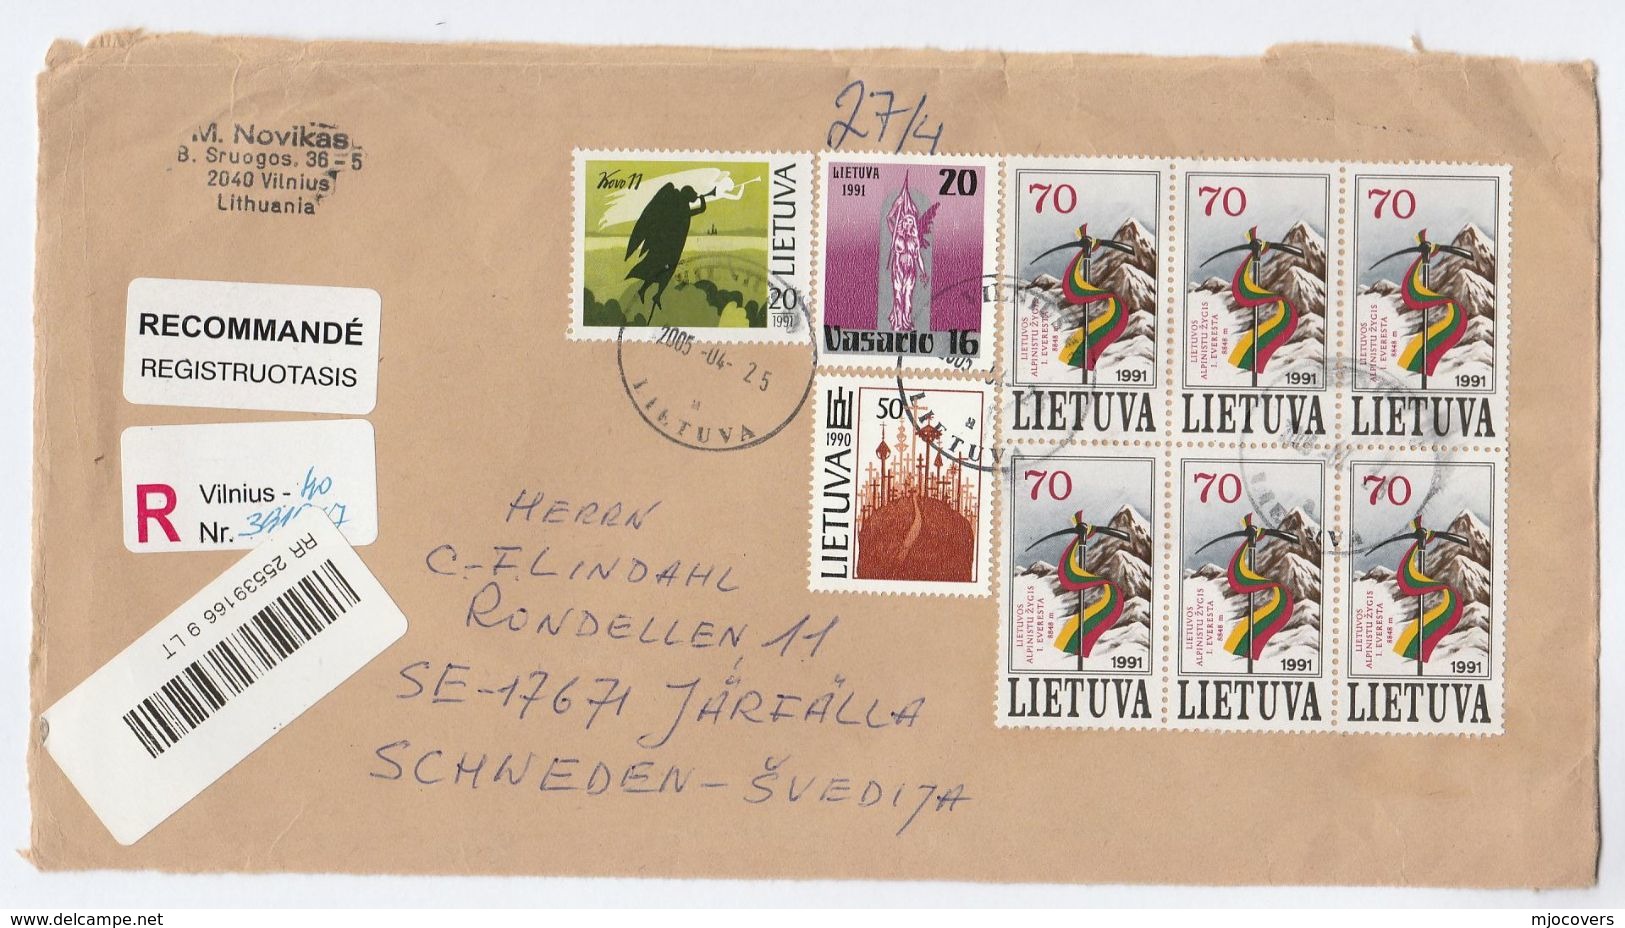 2005 REGISTERED LITHUANIA COVER (front)  6 X EVEREST MOUNTAINEERING Stamps  To Sweden, Mountain Climbing - Climbing